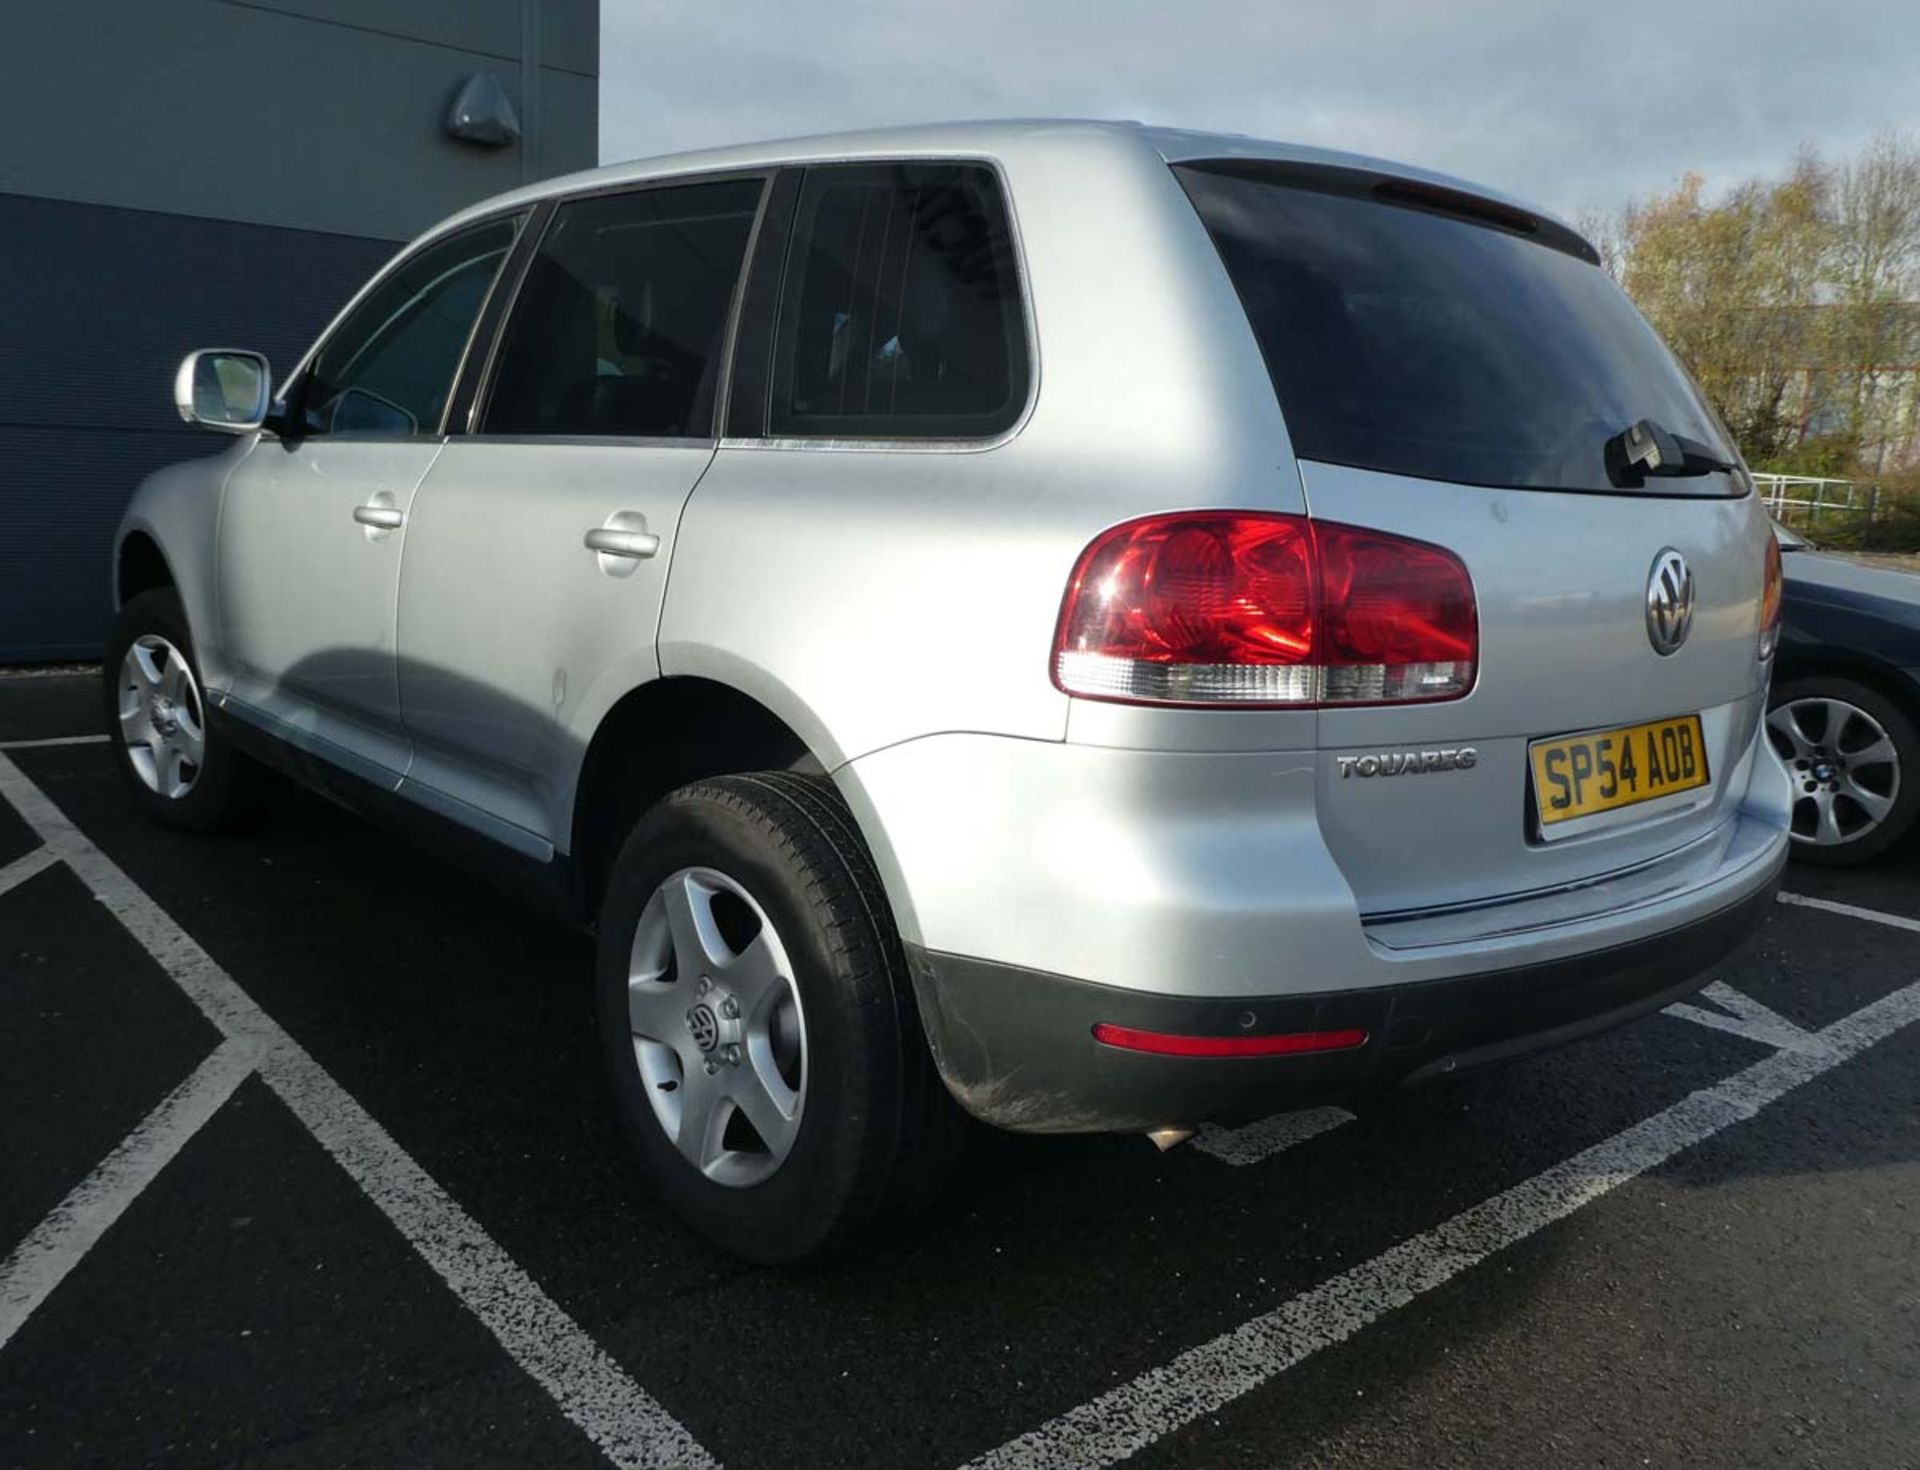 SP54 AOB (2004) Volkswagen Estate Touareg TDI in silver, 2461cc, diesel, 3 former keepers, 1 key, - Image 5 of 12